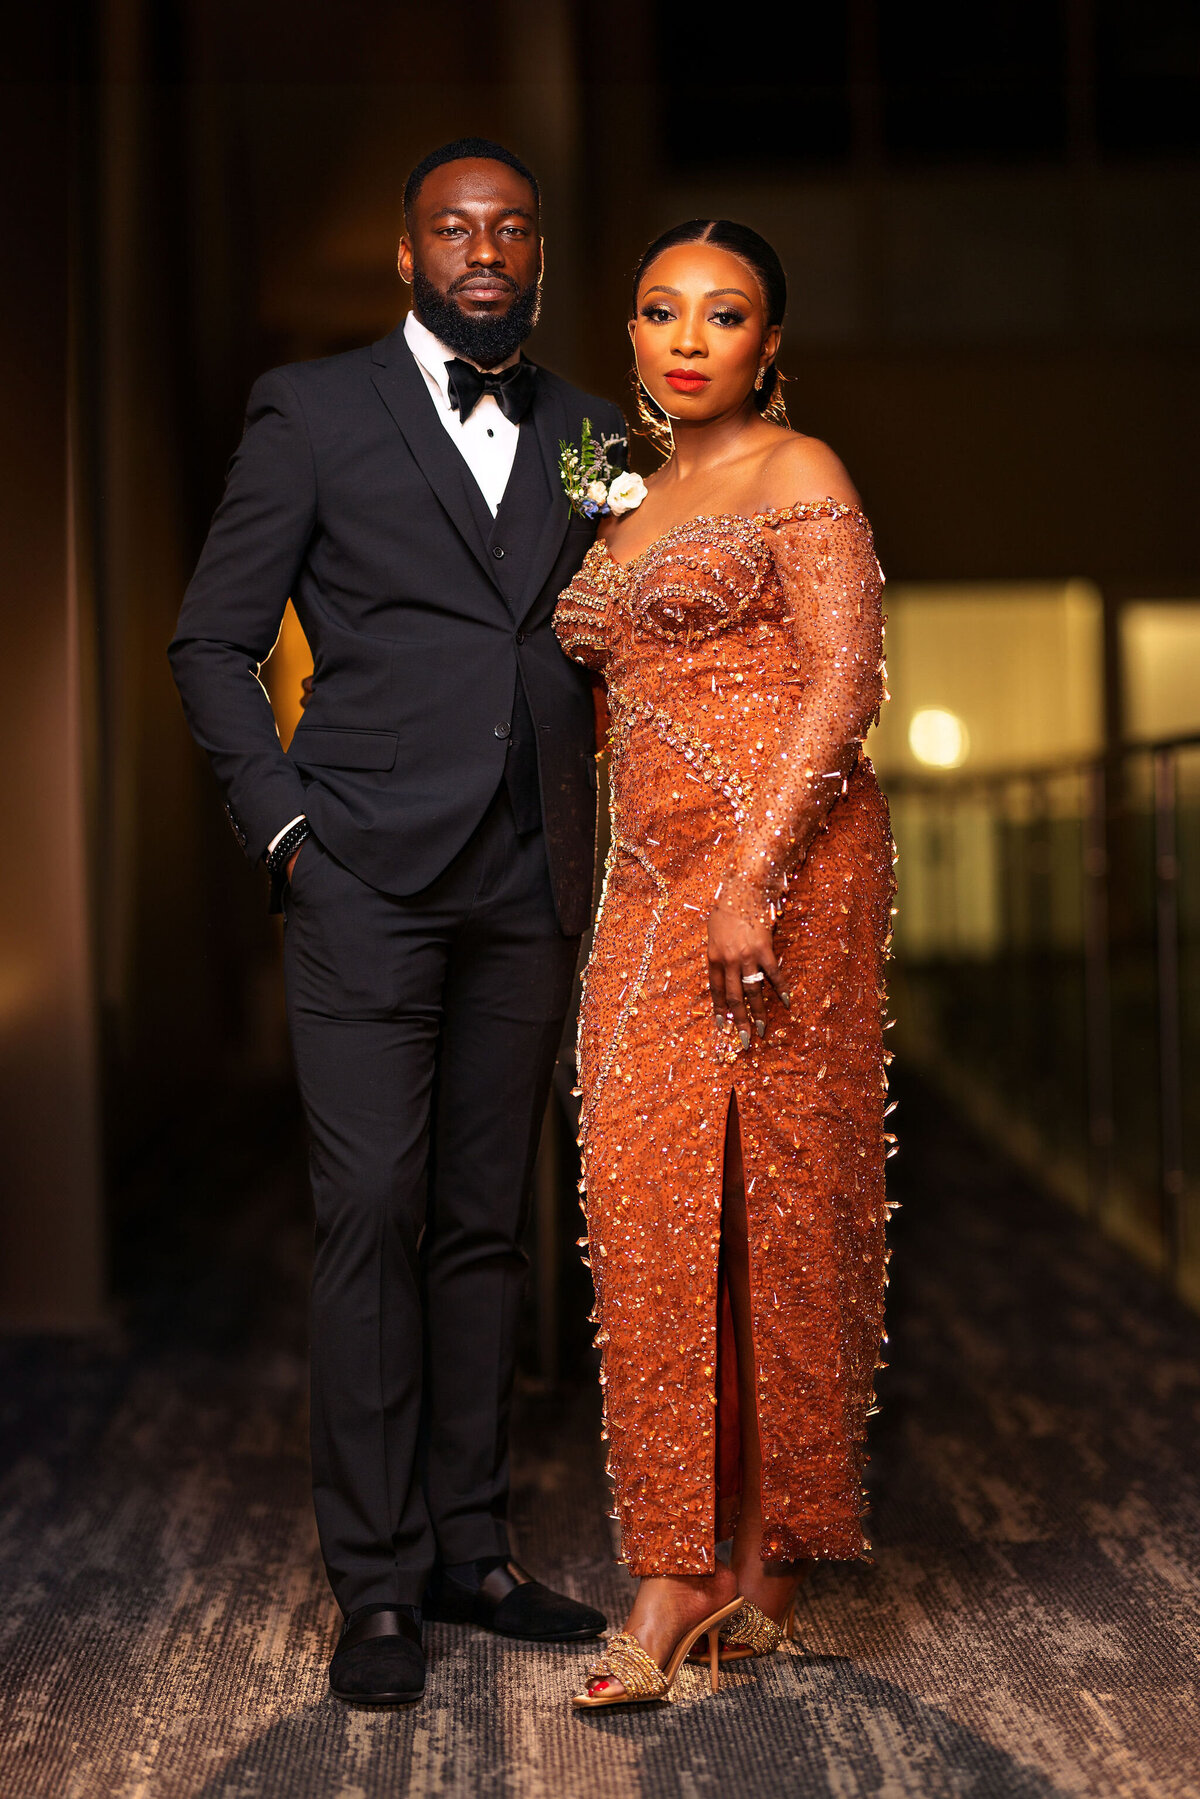 Tomi and Tolu Oruka Events Ziggy on the Lens photographer Wedding event planners Toronto planner African Nigerian Eyitayo Dada Dara Ayoola ottawa convention and event centre pocket flowers Navy blue groom suit ball gown black bride classy  81